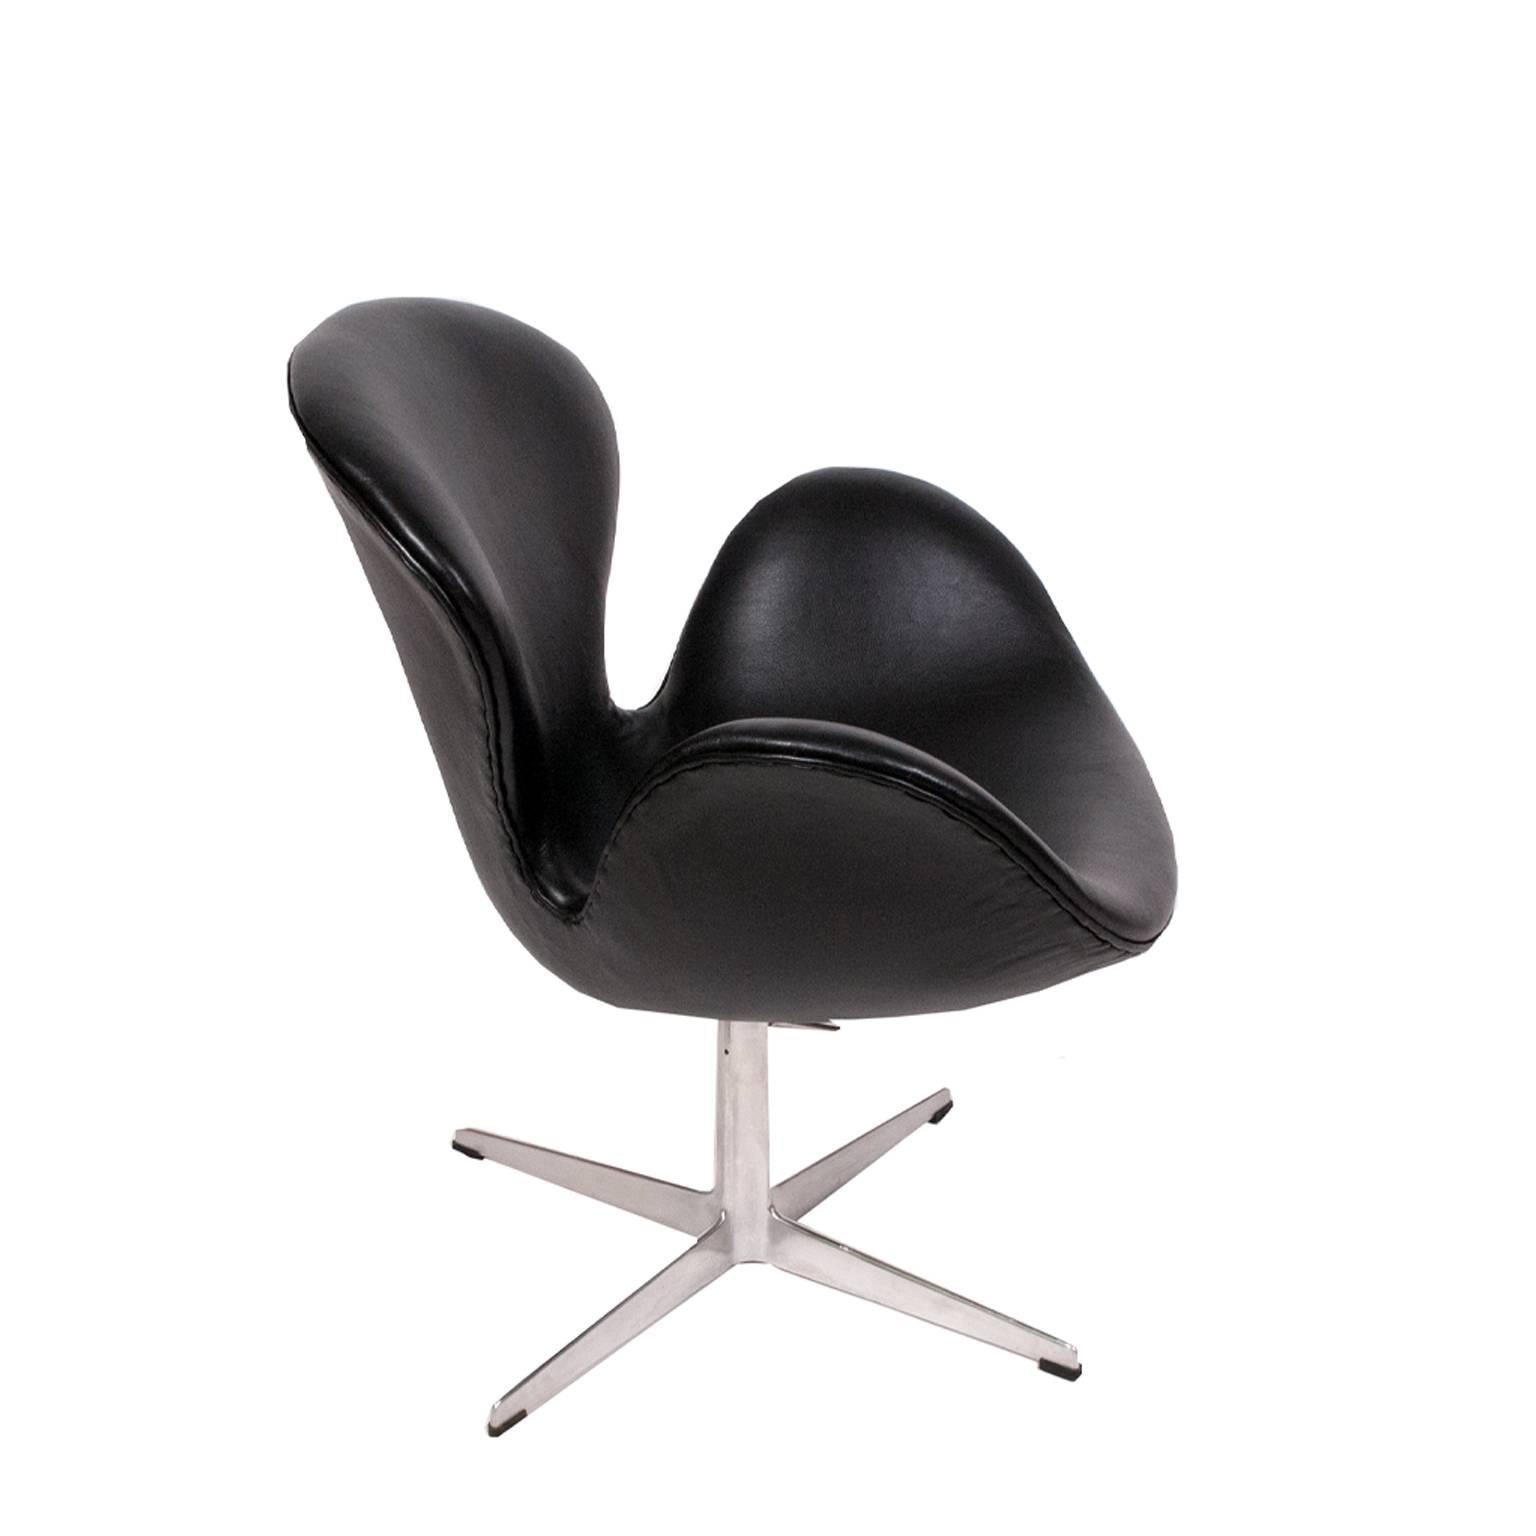 Rare version of the Swan chair; height can be adjusted from lounge to dining height. .  New leather upholstery and original aluminum base.  Made by Fritz Hansen.